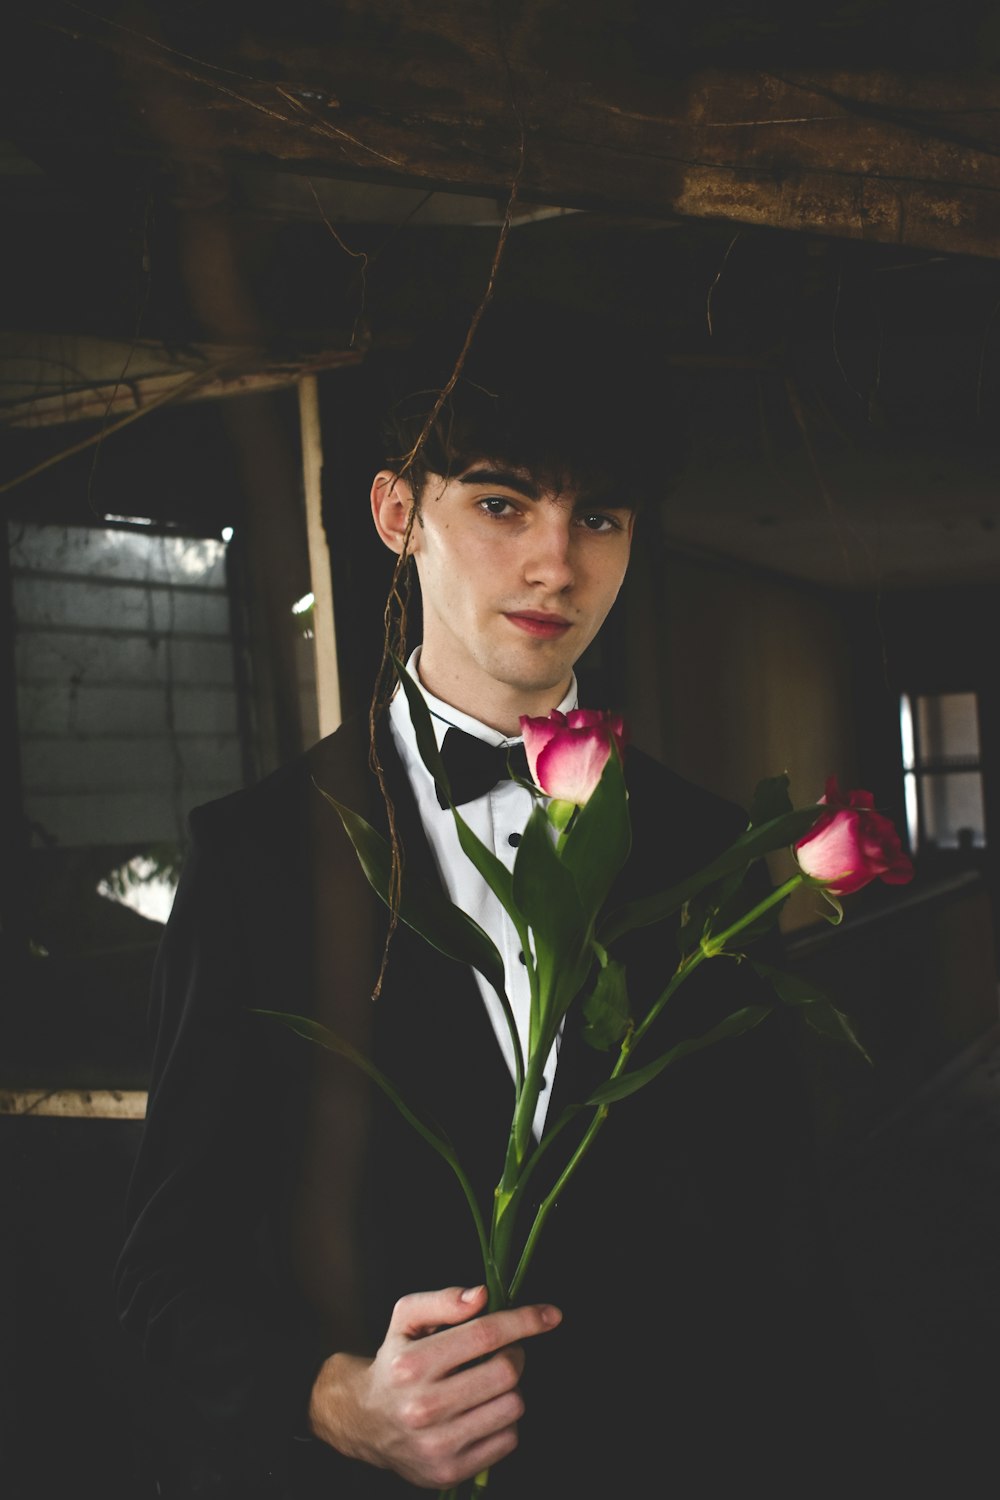 man wearing black and white formal suit holding two red roses